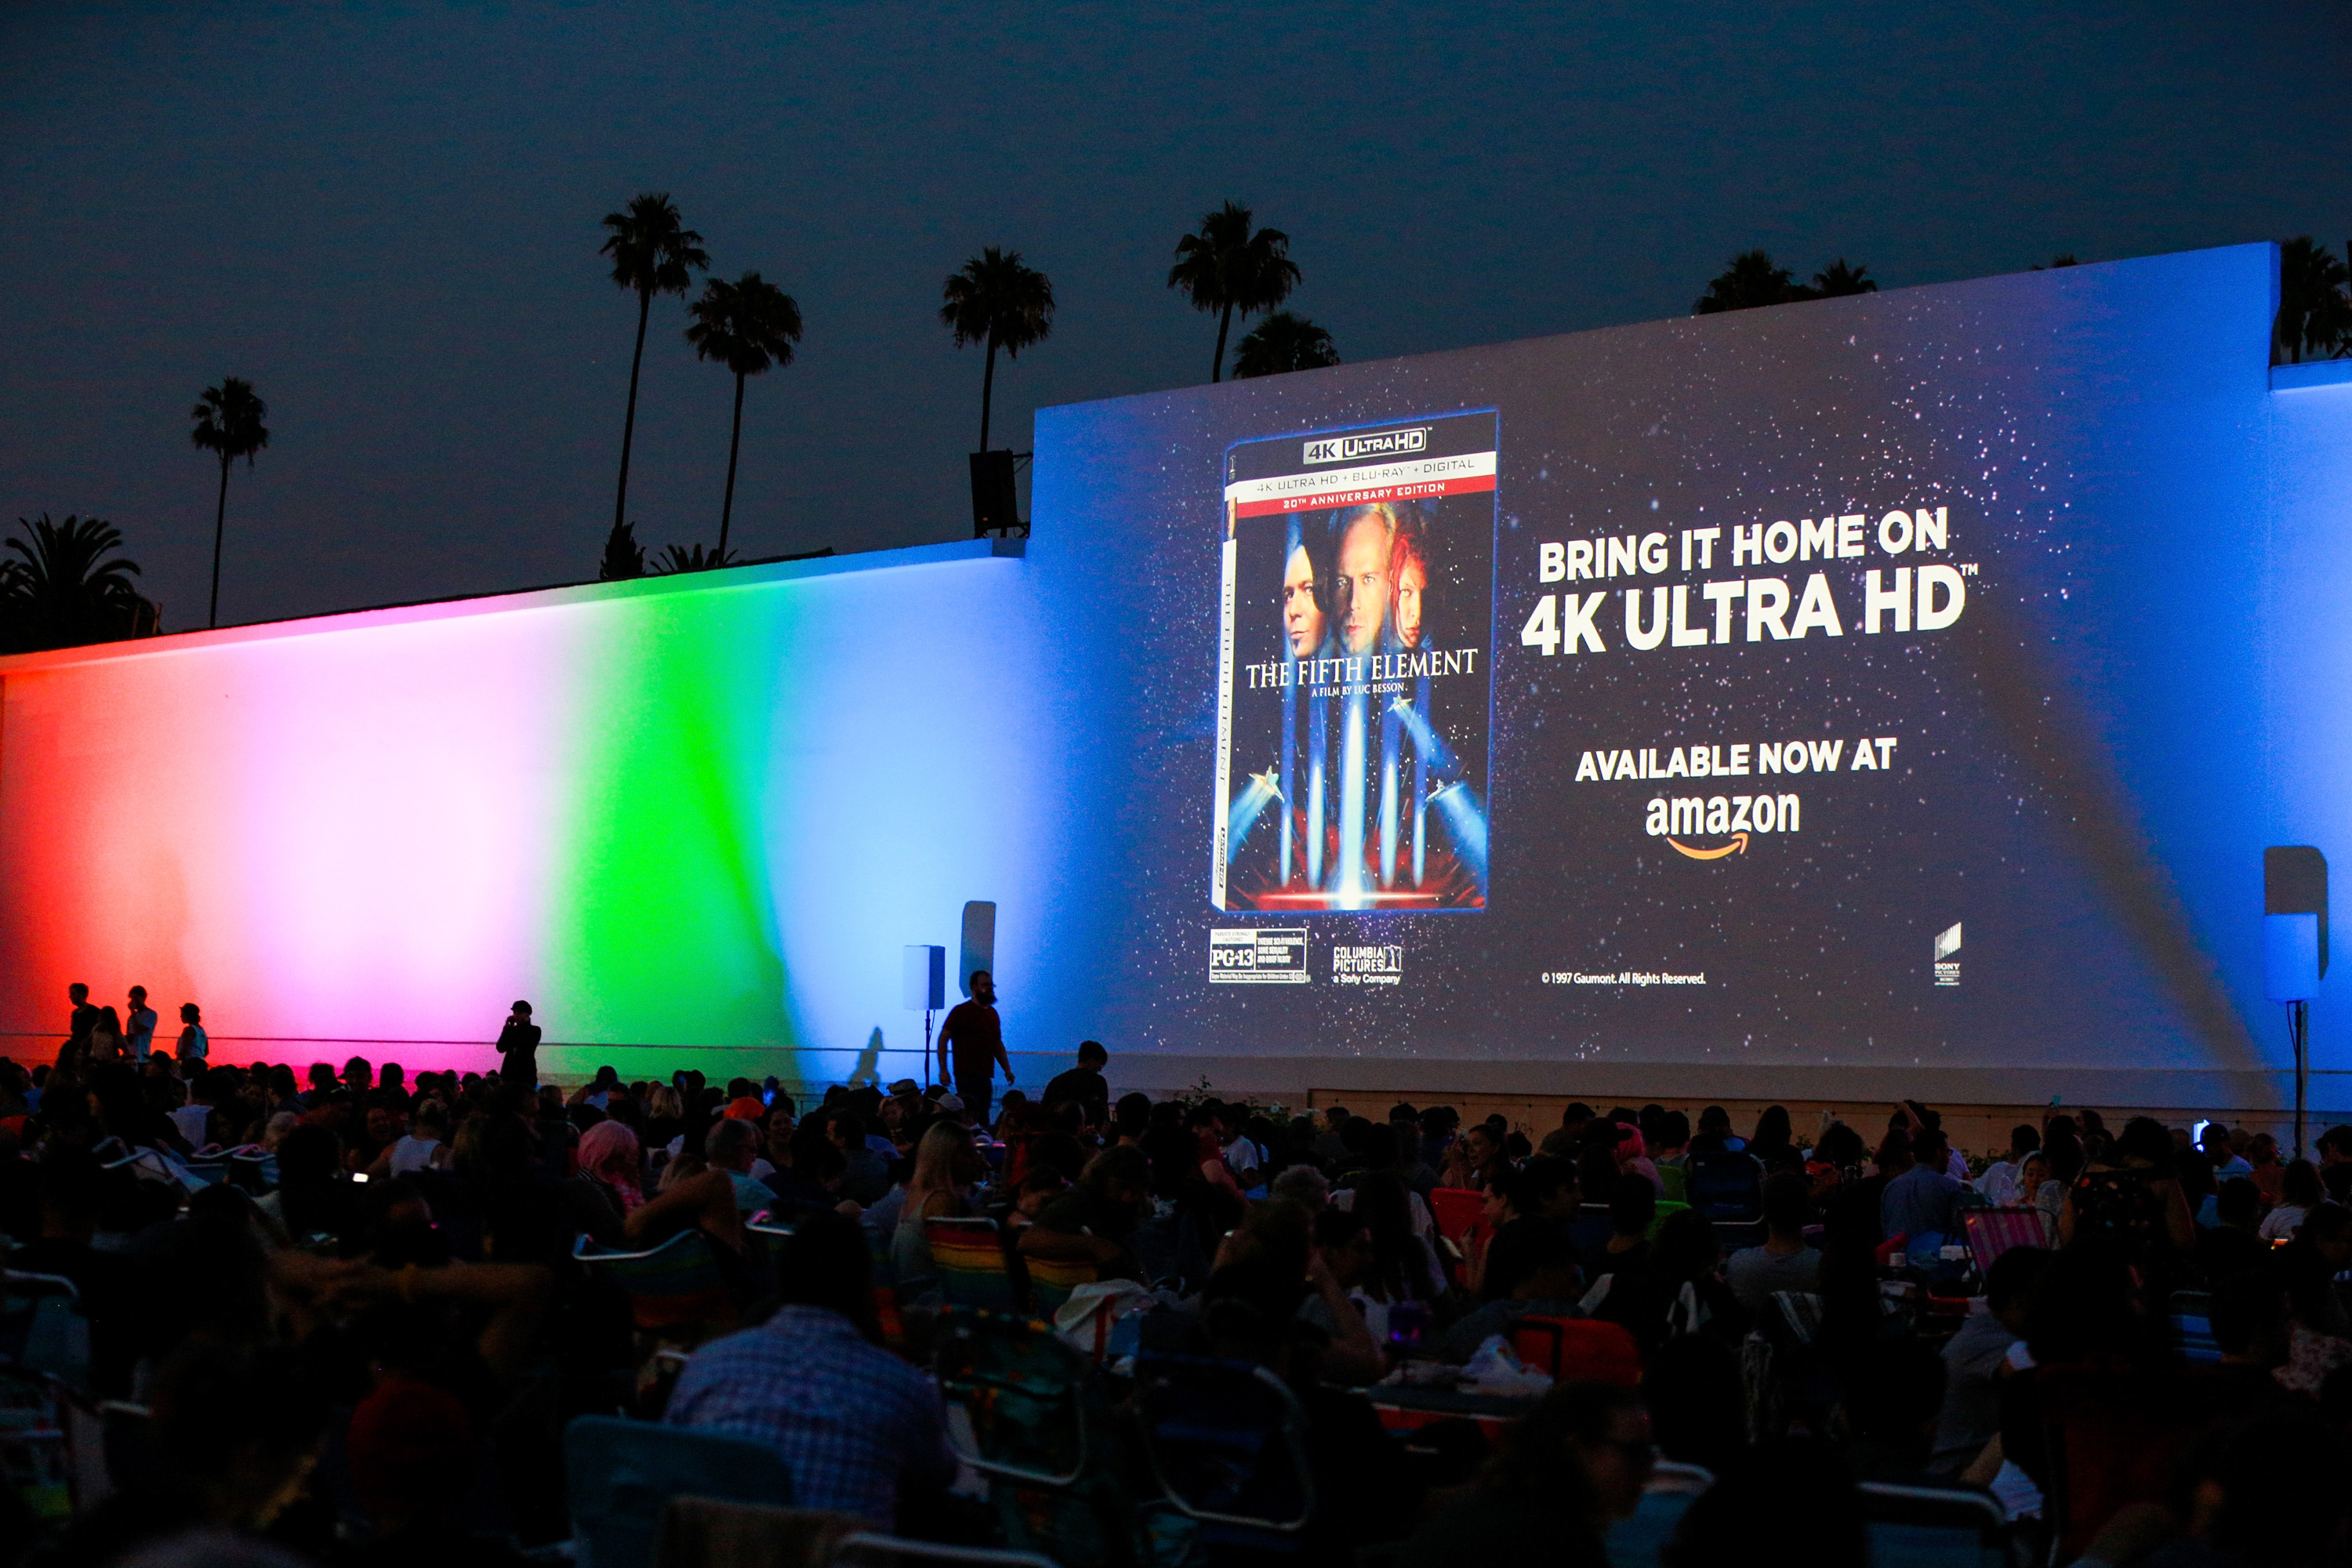 Cinespia Presents "The Fifth Element"